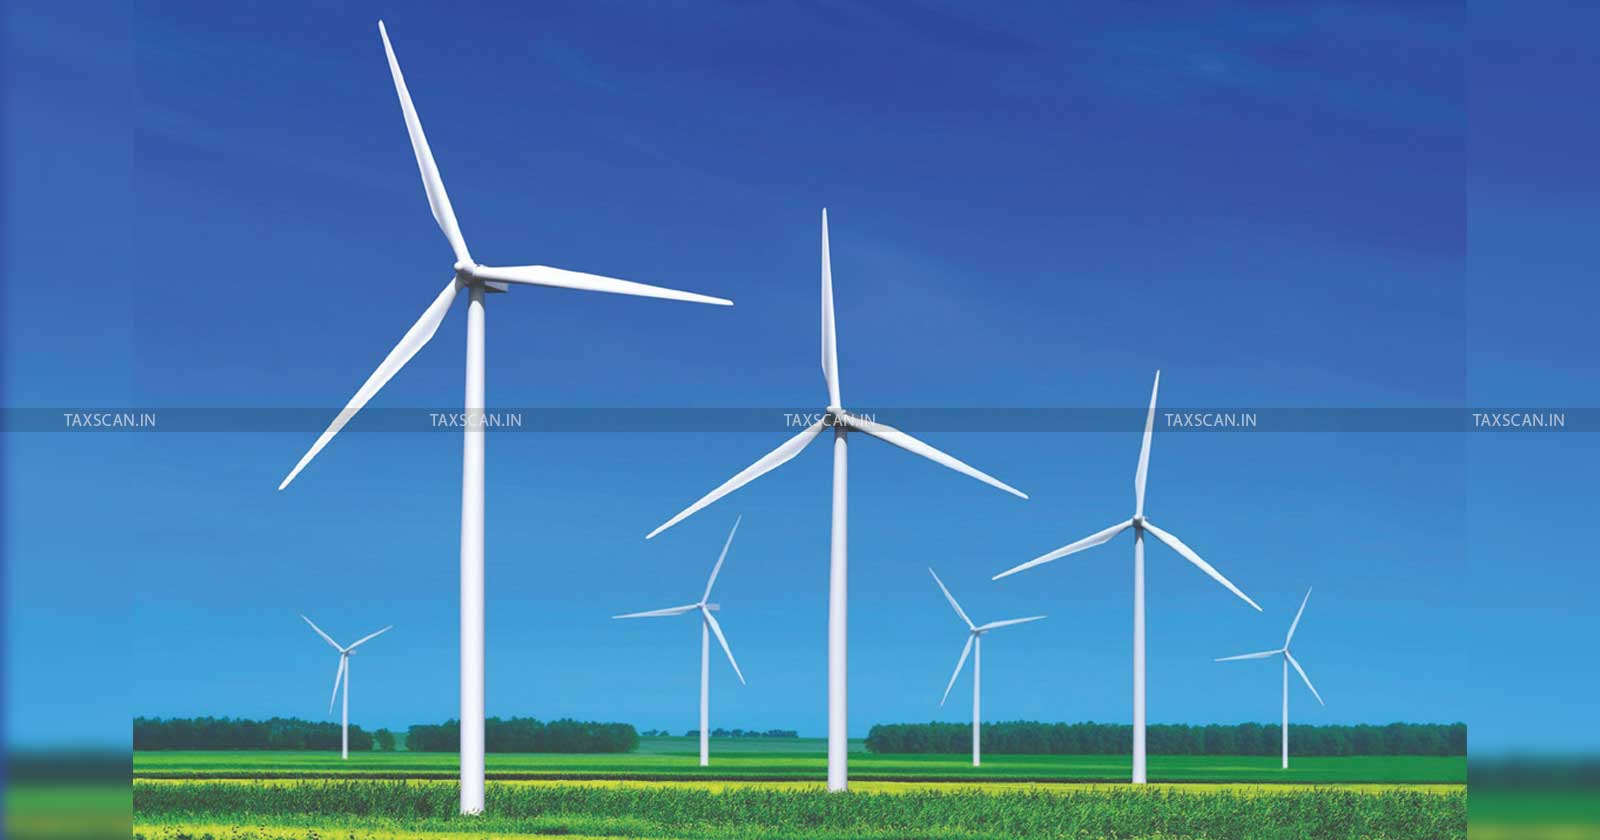 Central Govt waives Inter-State Transmission Charges - Off-Shore Wind Projects and extends waiver to - Green Hydrogen and Green Ammonia - TAXSCAN